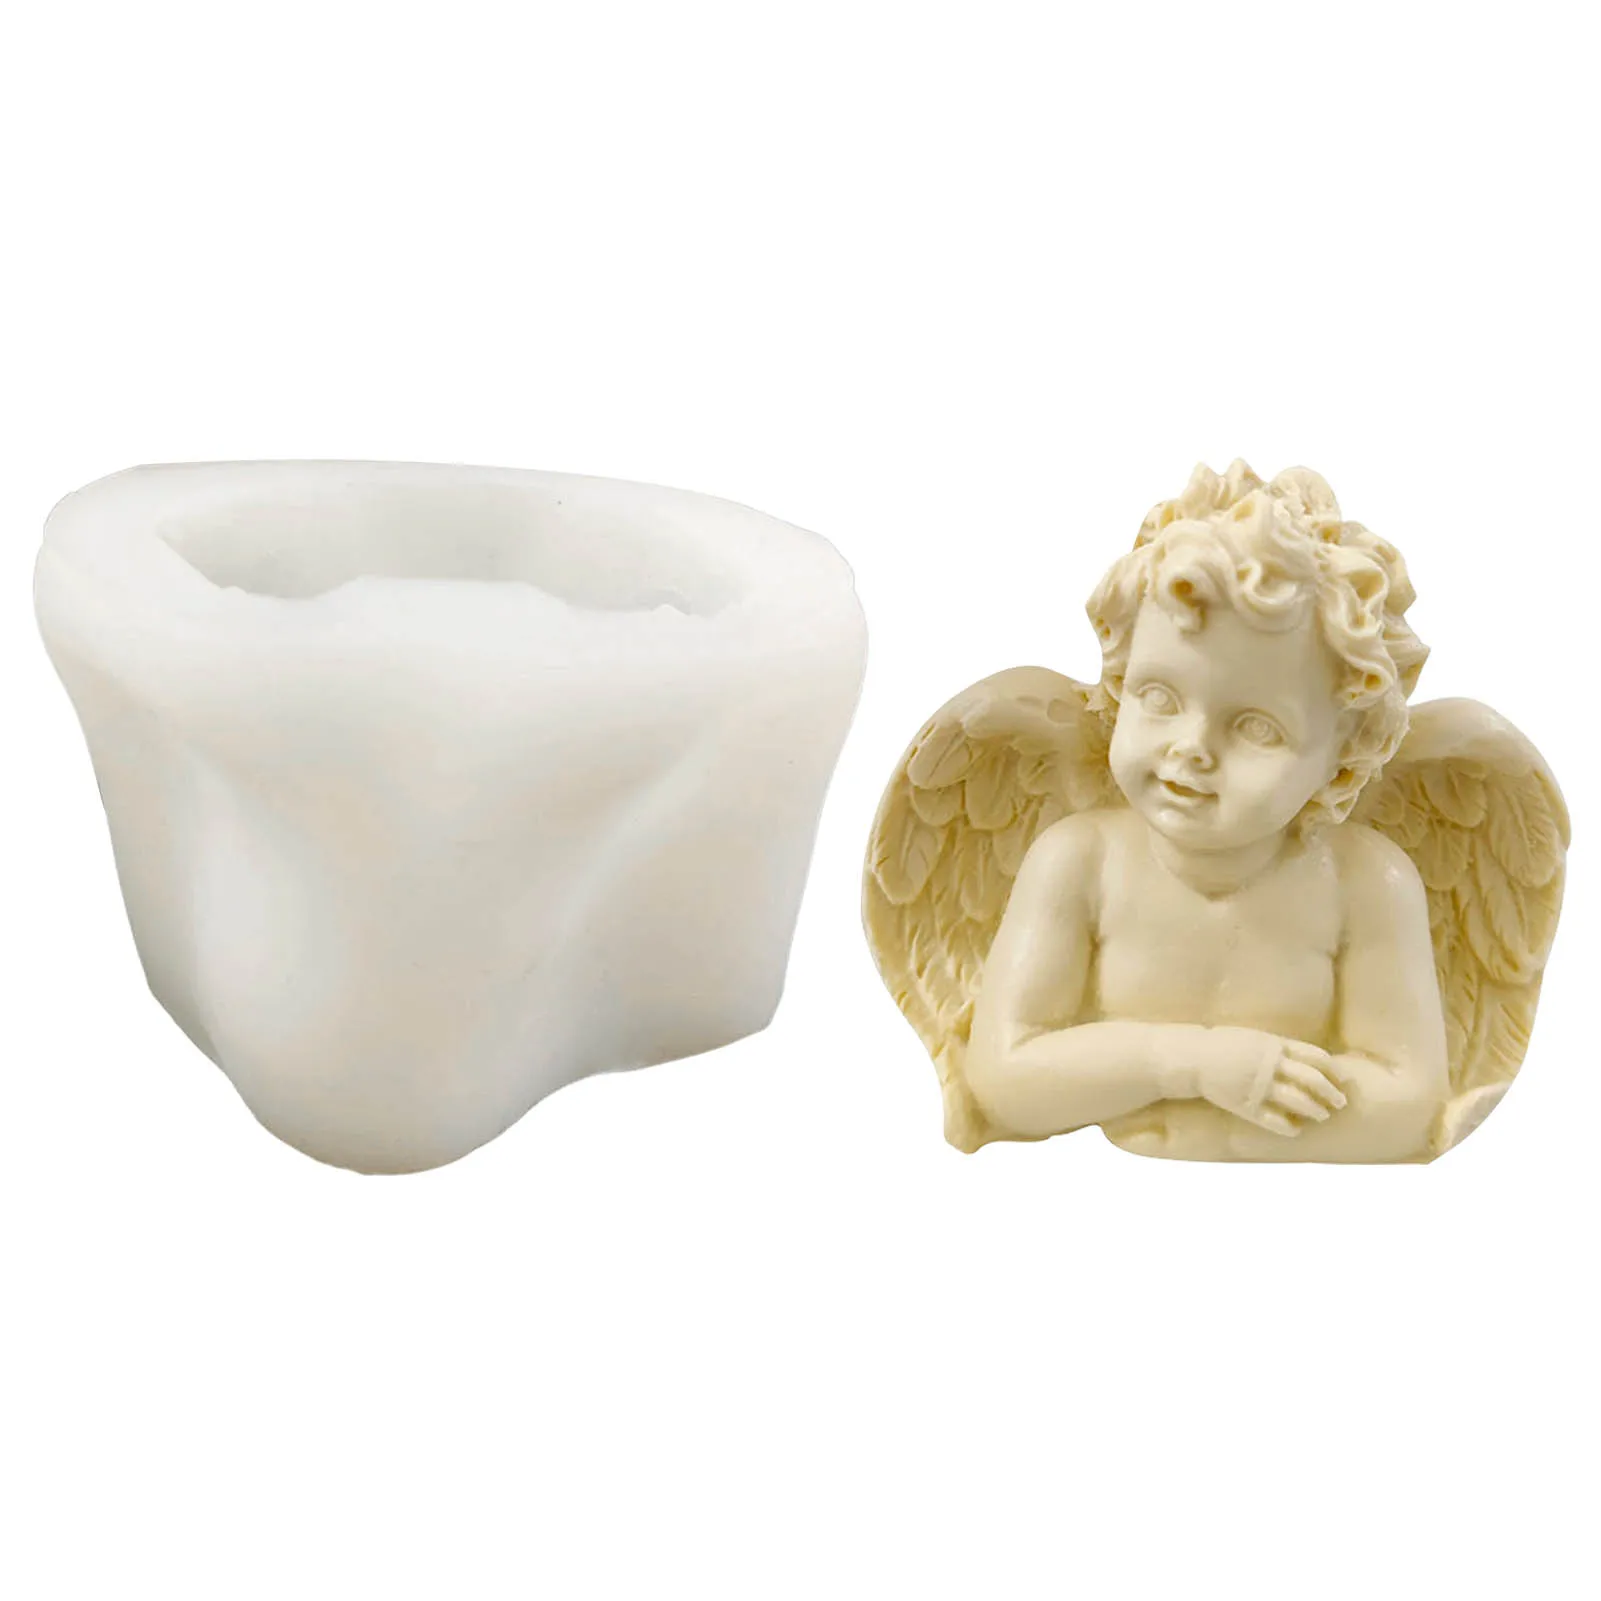 

3D Angel Silicone Mold Candle Making Resin Moulds For DIY Handcraft Cake Fondant Chocolate Soap Aromatherapy Table Ornaments